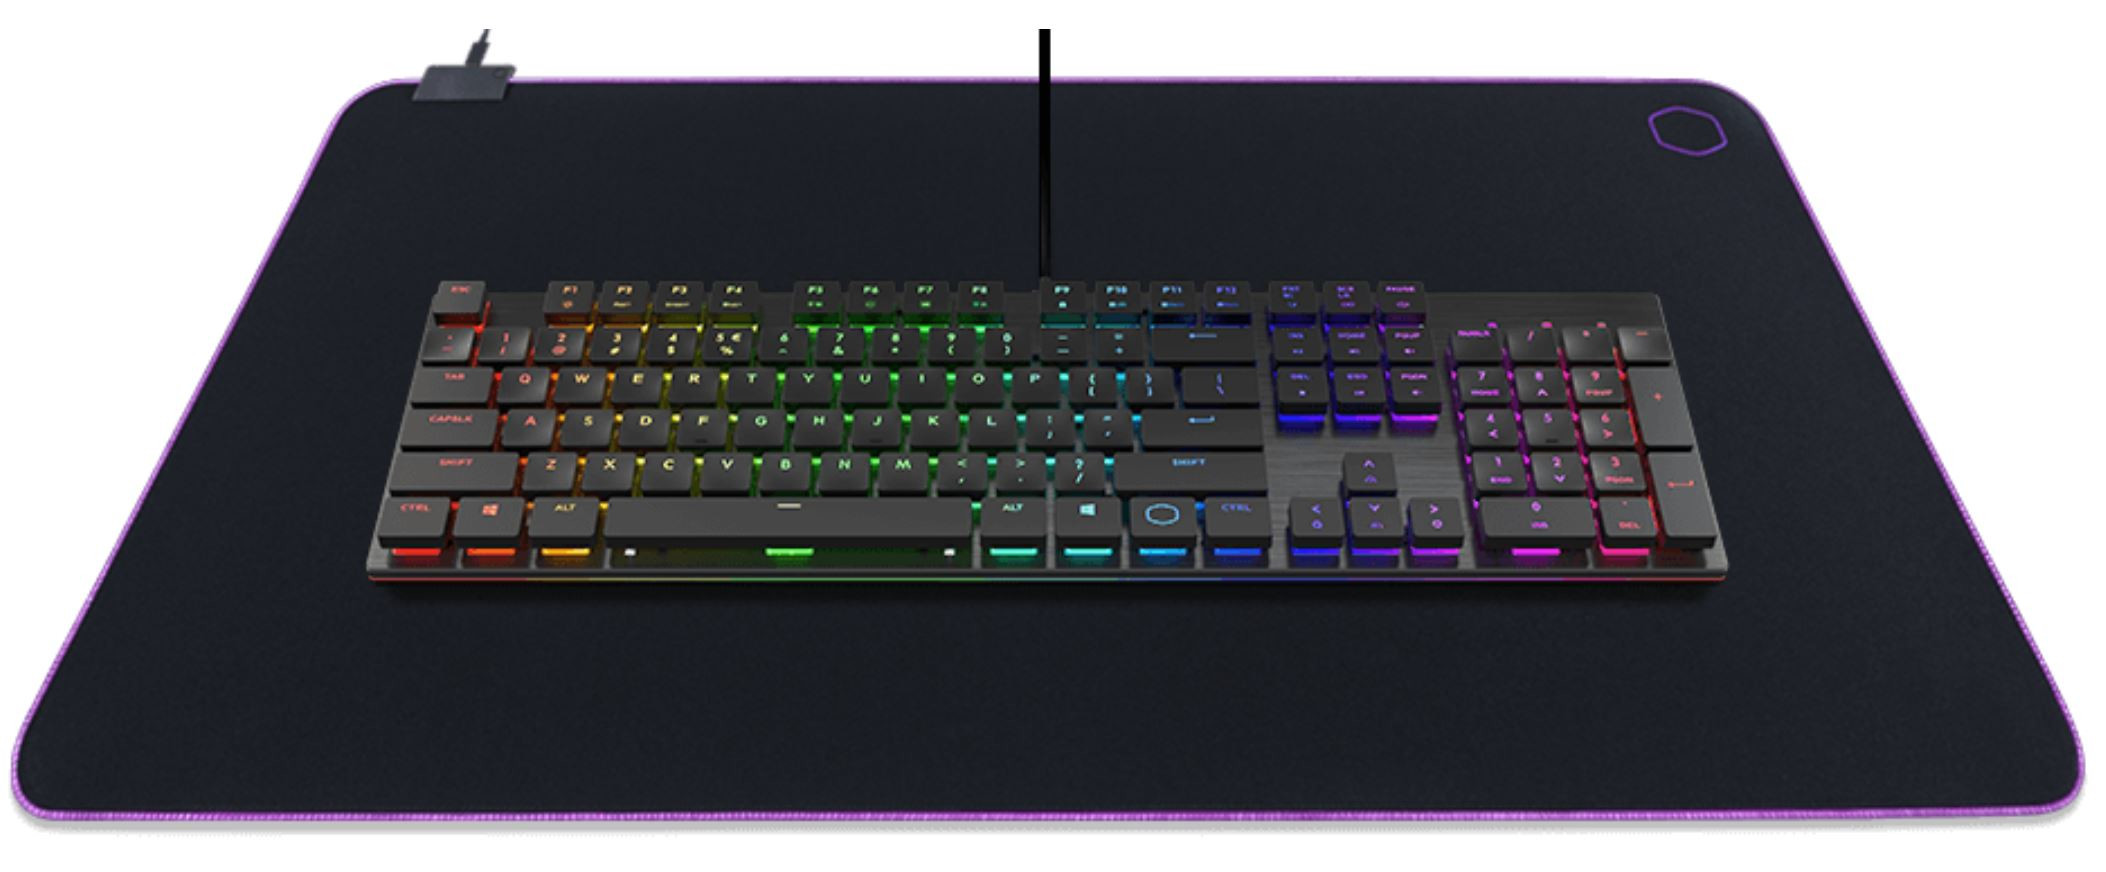 Cooler Master Introduces Low Profile Keyboard Series Techpowerup